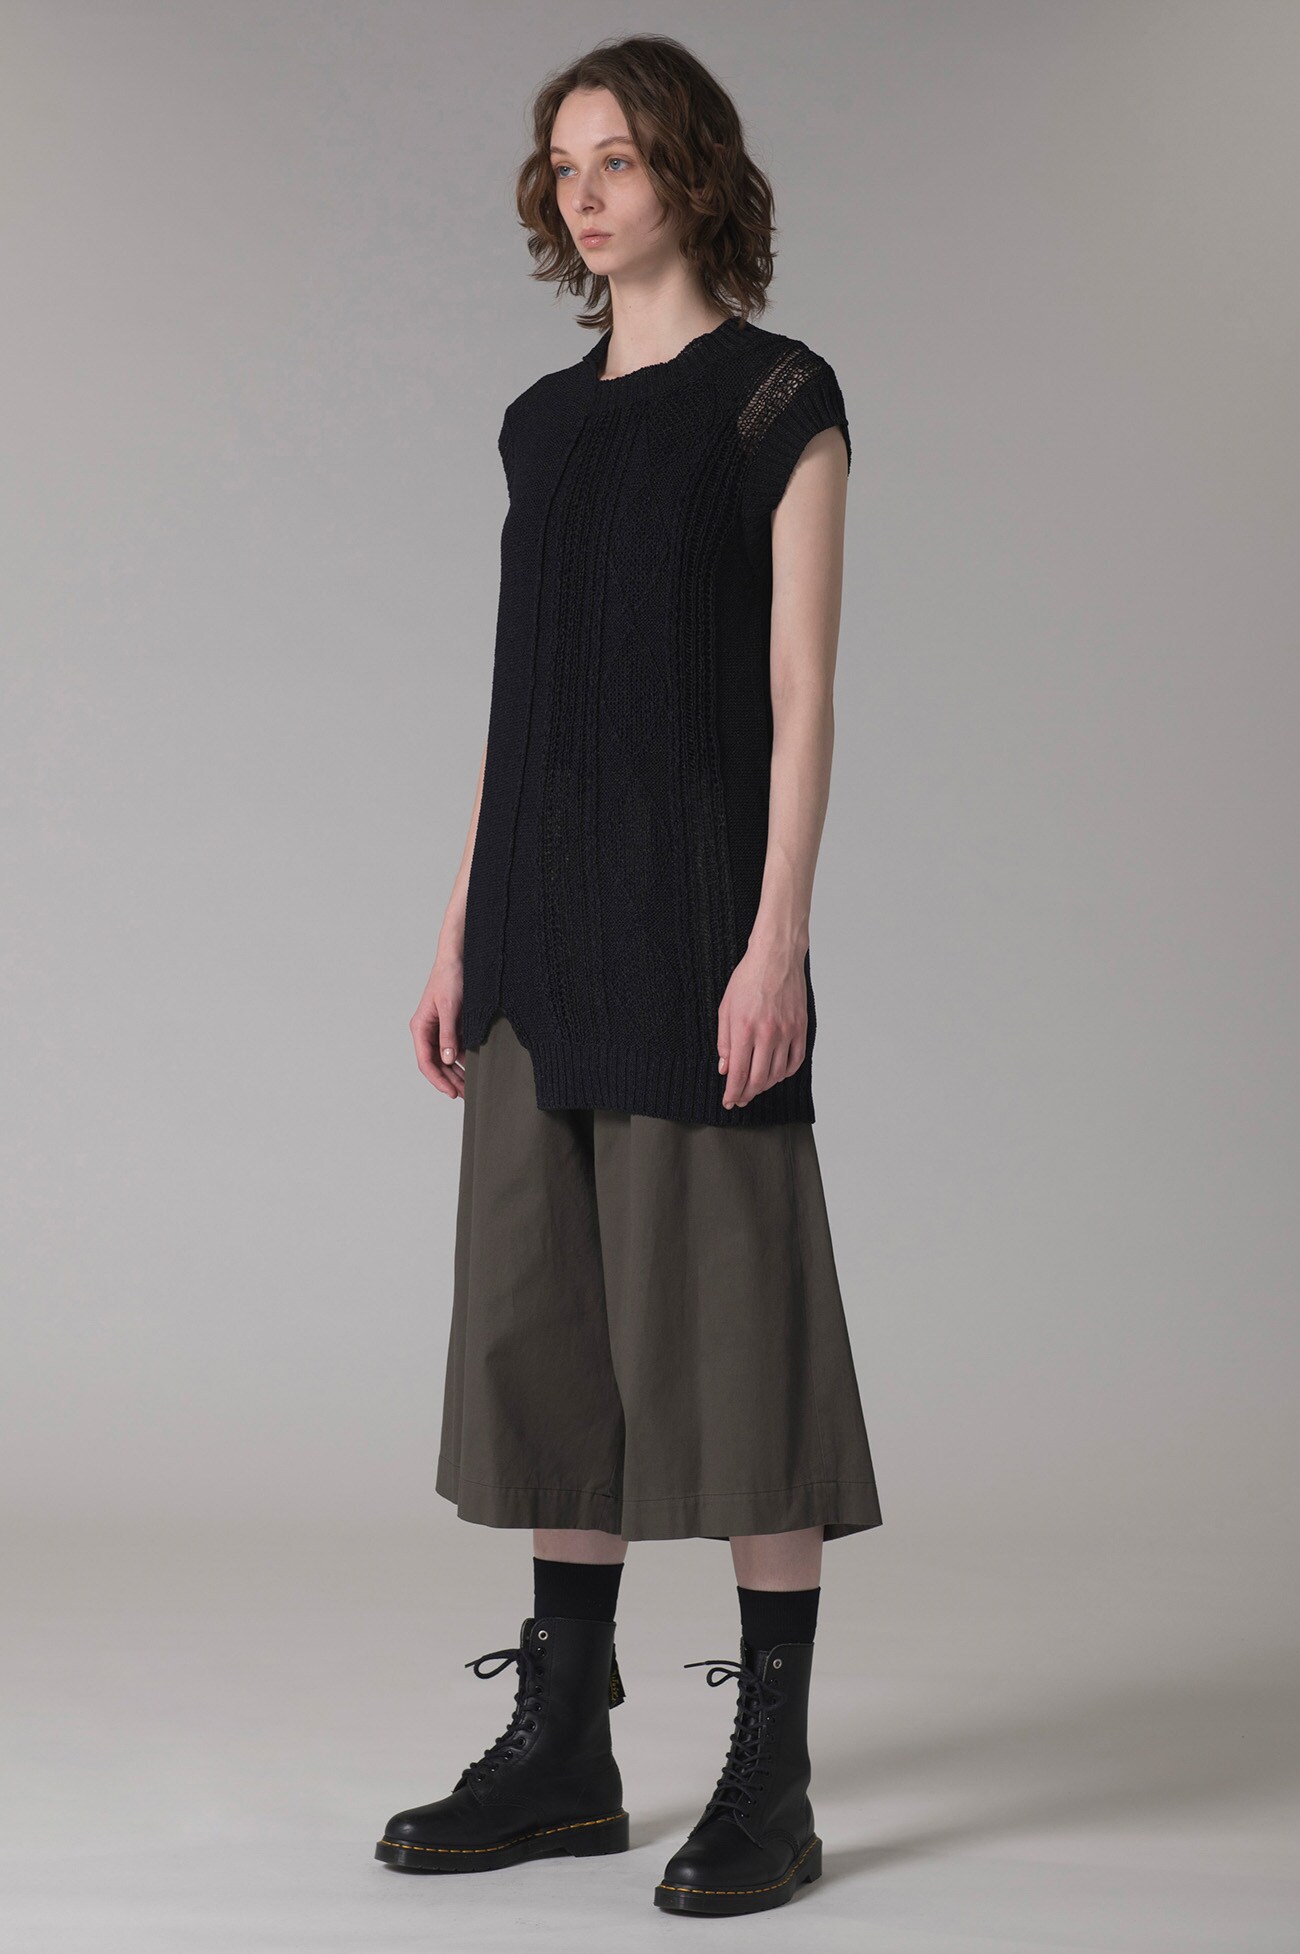 PLAIN STITCH x CABLE KNIT SLEEVELESS PULLOVER